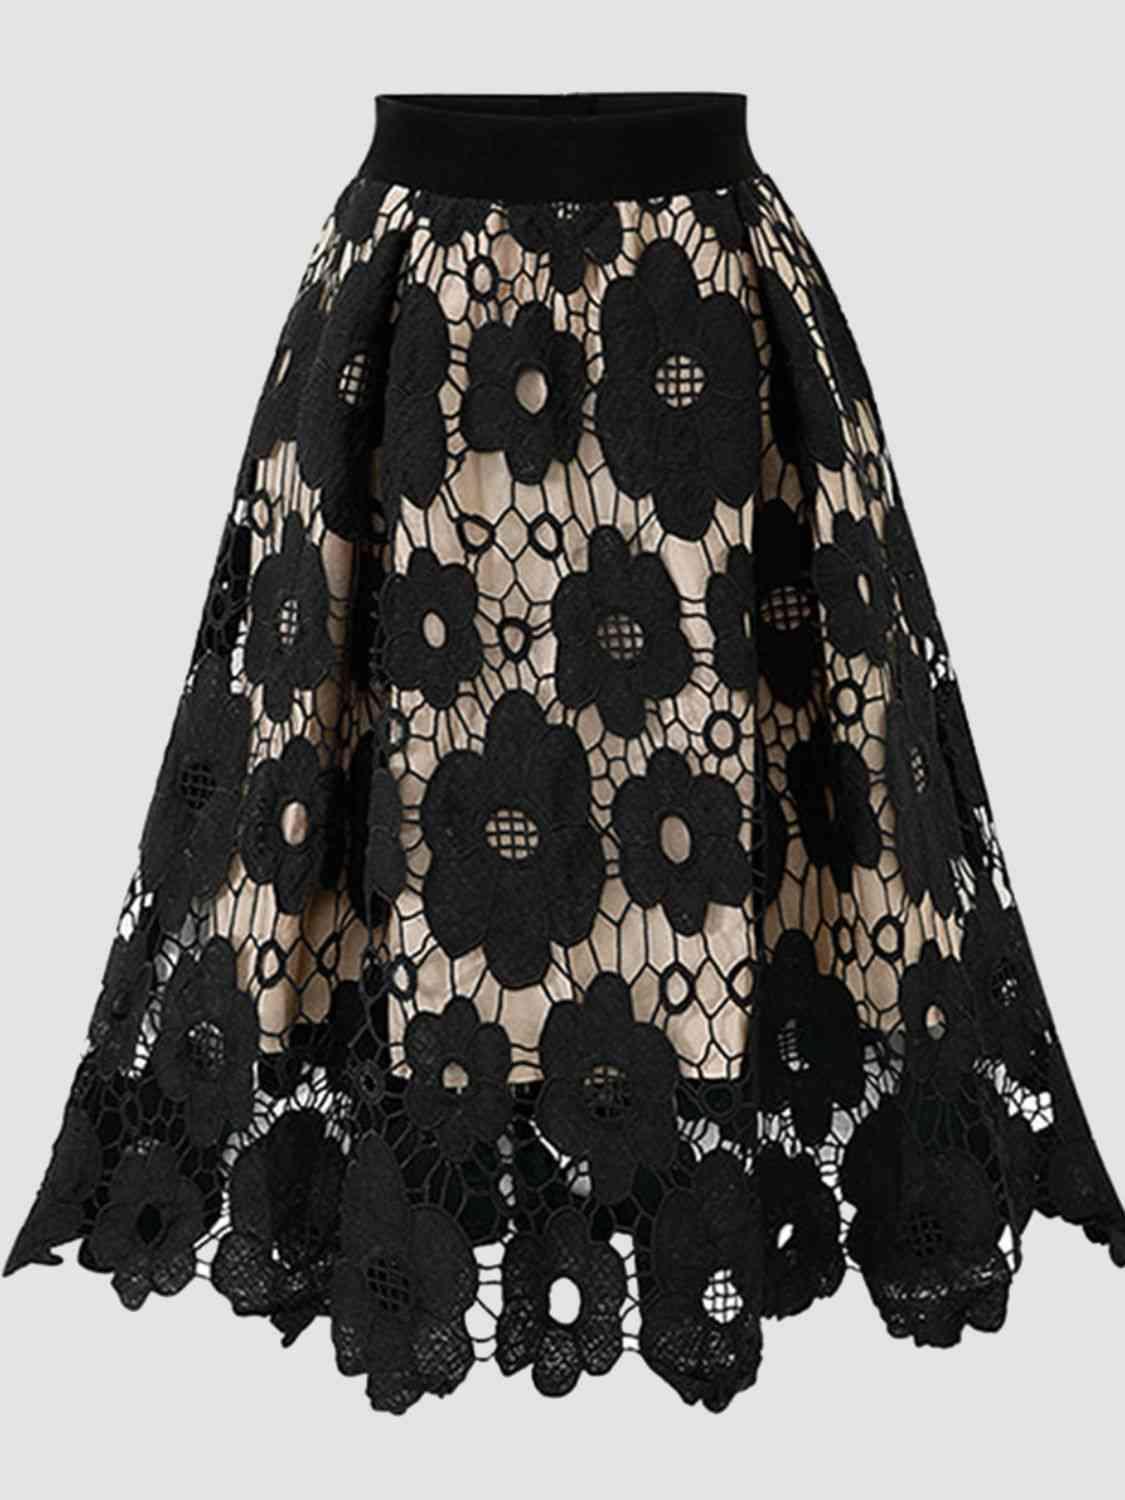 Effortlessly Chic: Floral Lace A-Line Skirt for Trendsetters